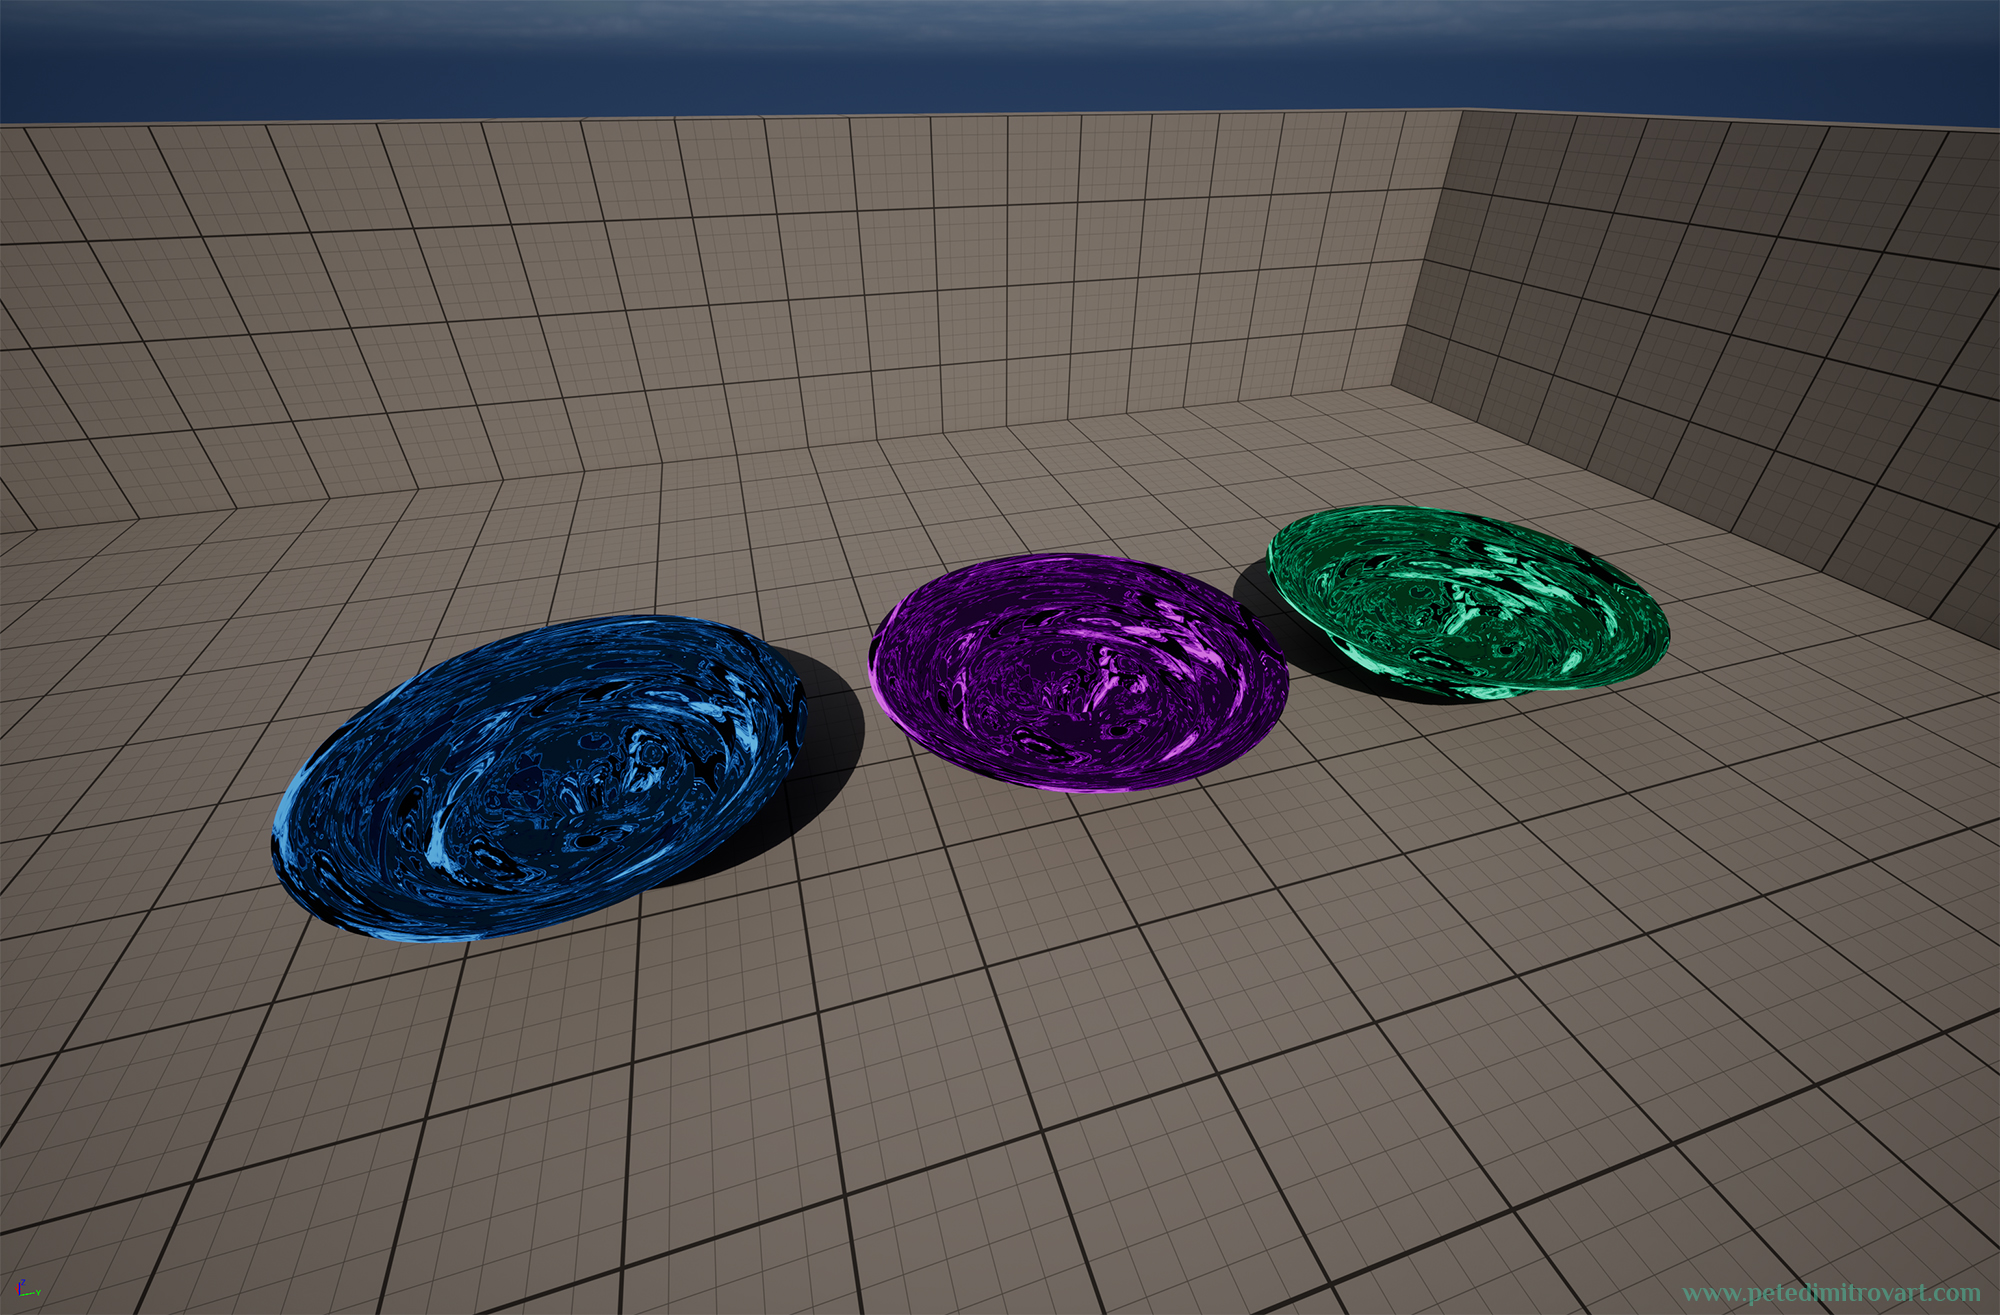 UE5 scene screenshot. Displays the end result of the color settings above. Three vortex basins sit onto a gray placeholder floor. They are blue, purple and green in color tint and have the liquid-metal patterns and distortion we are after.